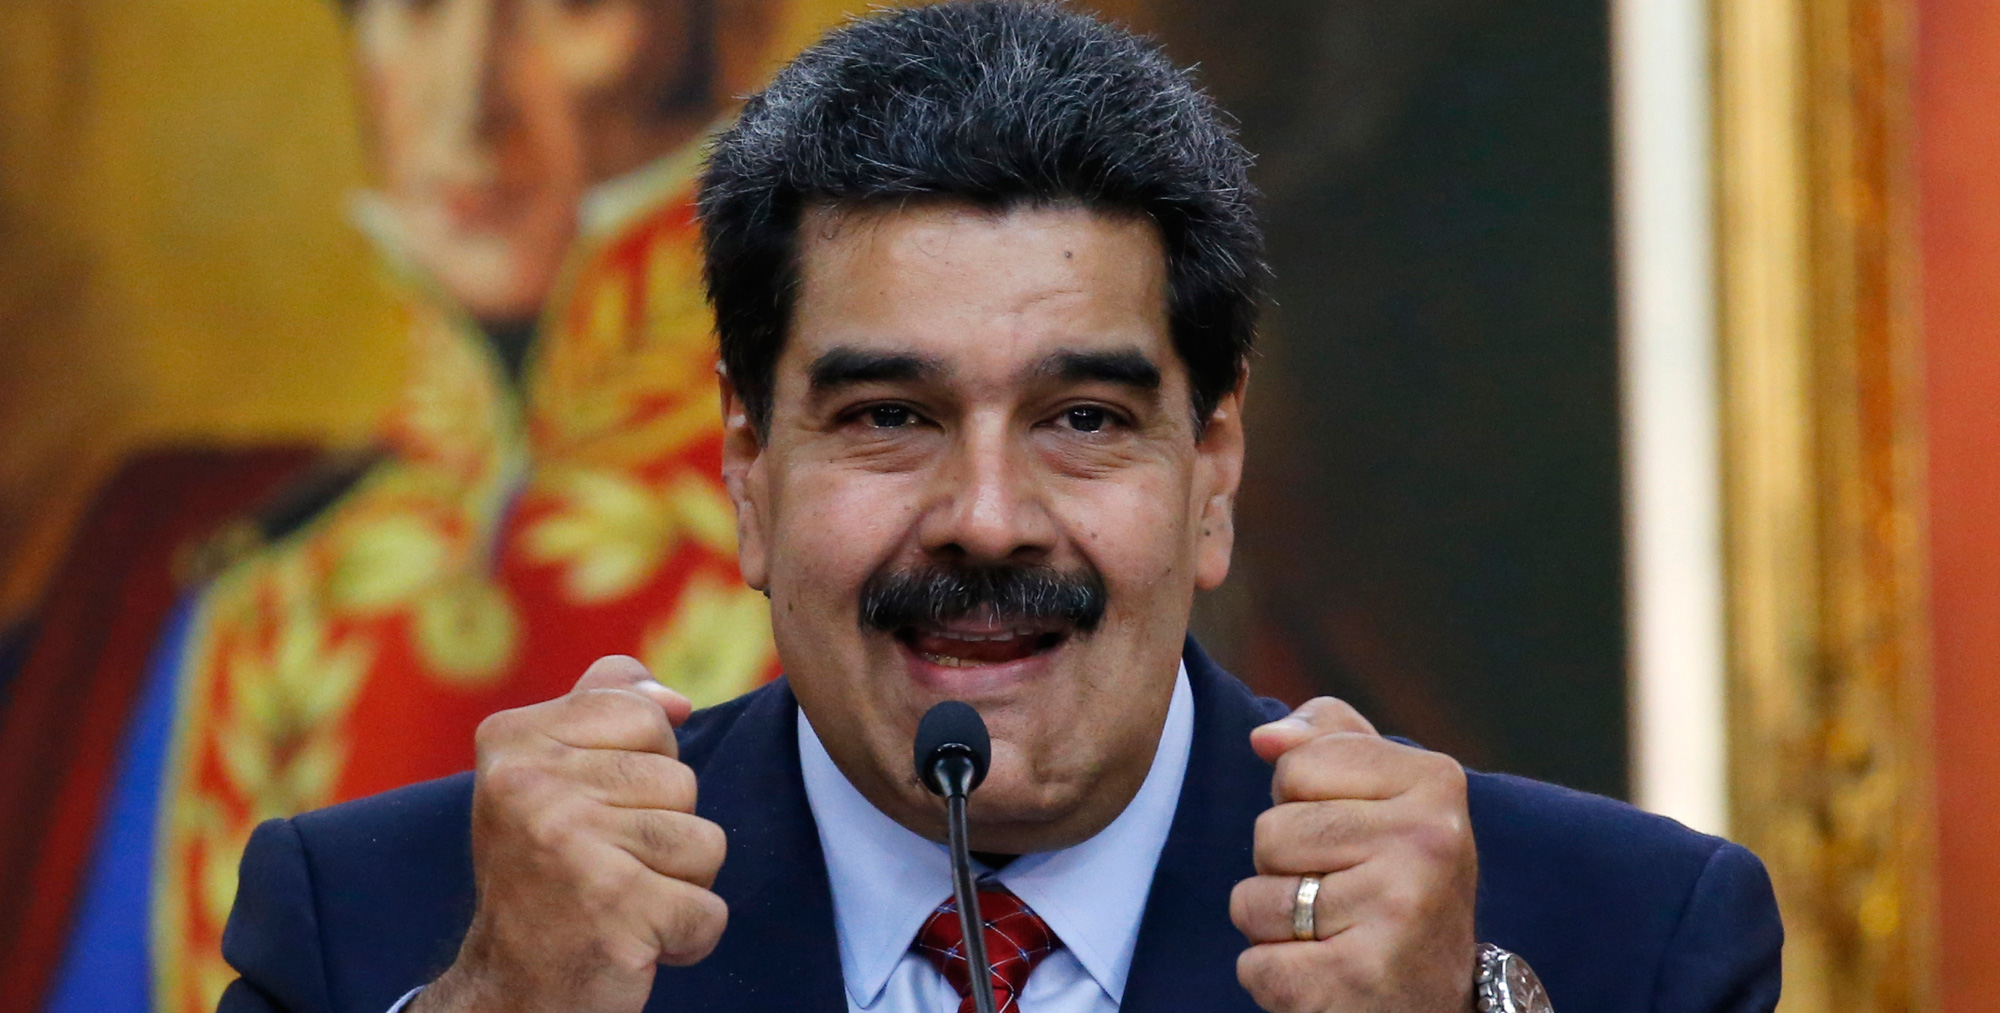 Venezuelan President Nicolas Maduro holds up his fists during a press conference at Miraflores presidential palace in Caracas, Venezuela on Friday, January 25, 2019, amid a political power struggle with an opposition leader who has declared himself interim president.